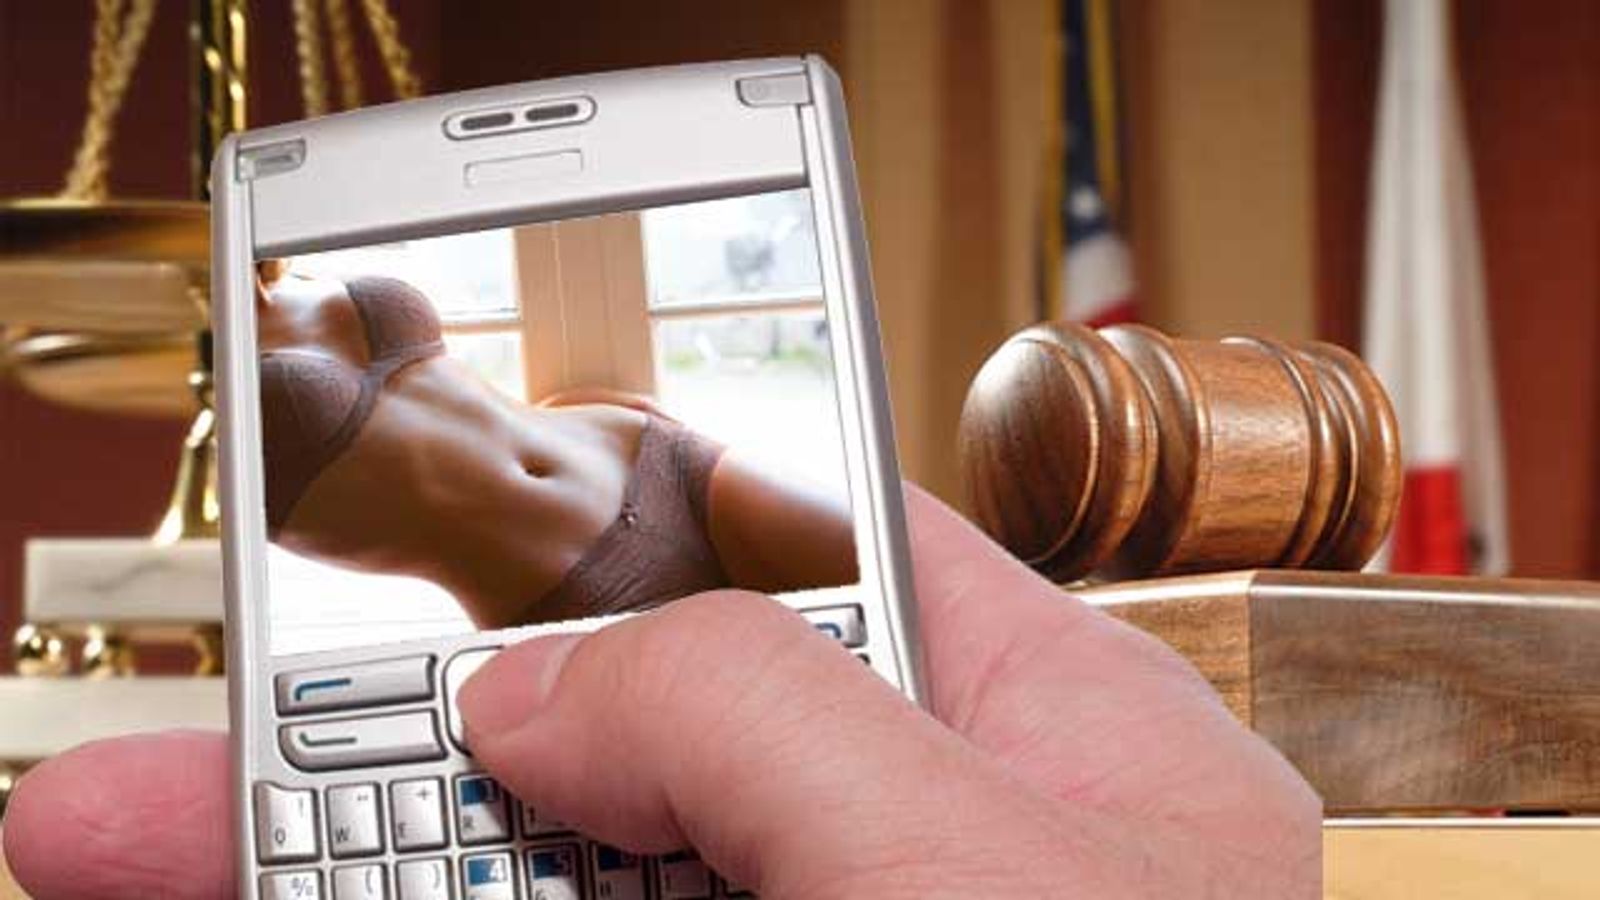 Massachusetts House Acts to Close Sexting Loophole